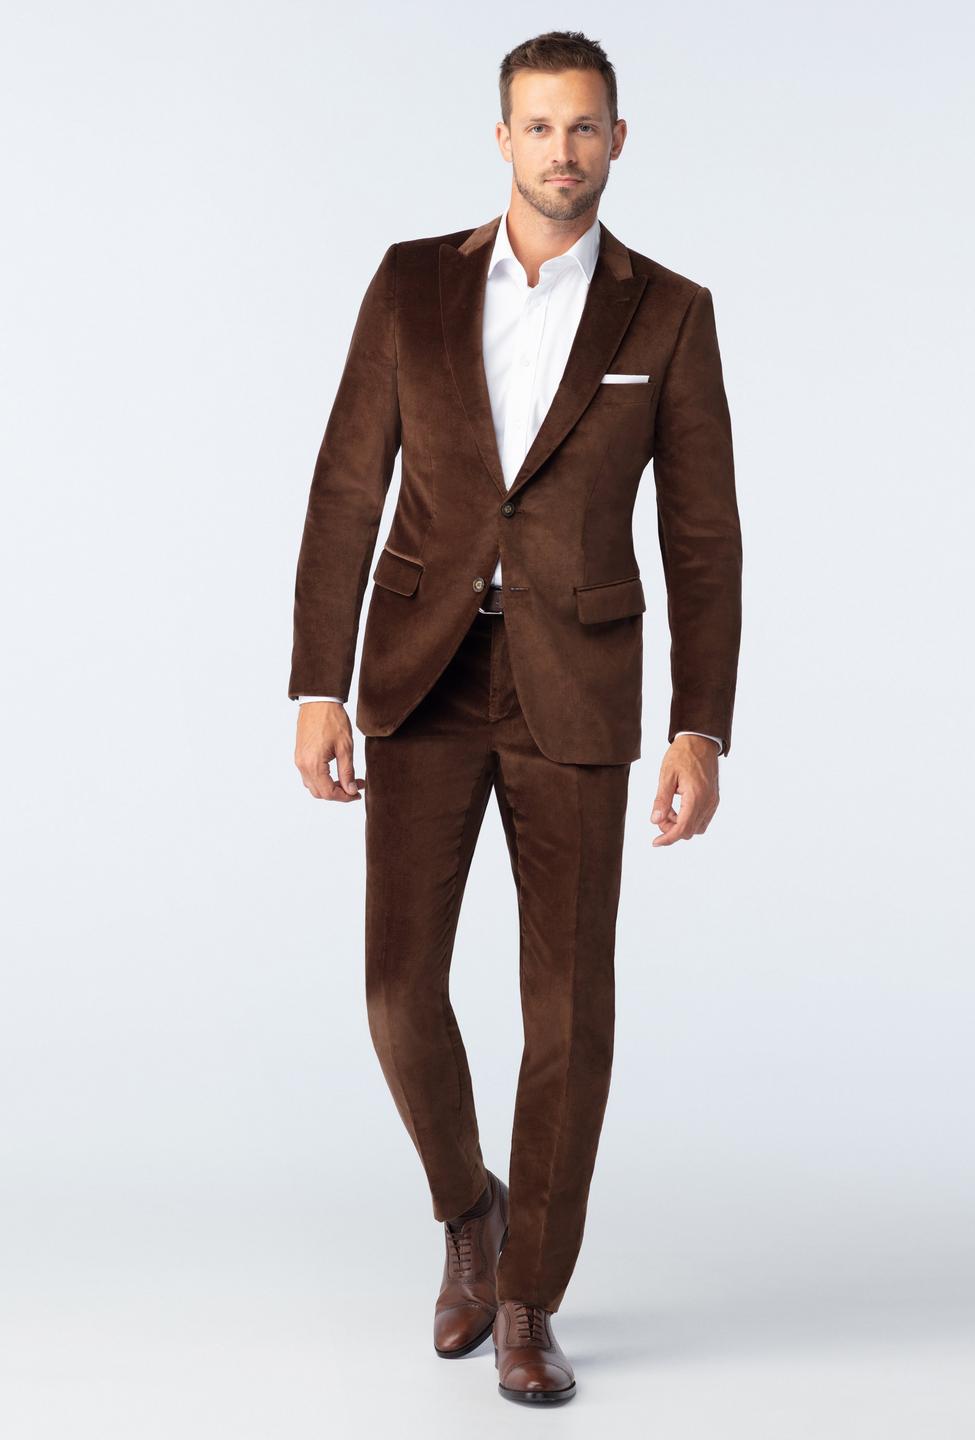 Brown suit - Harford Solid Design from Premium Indochino Collection